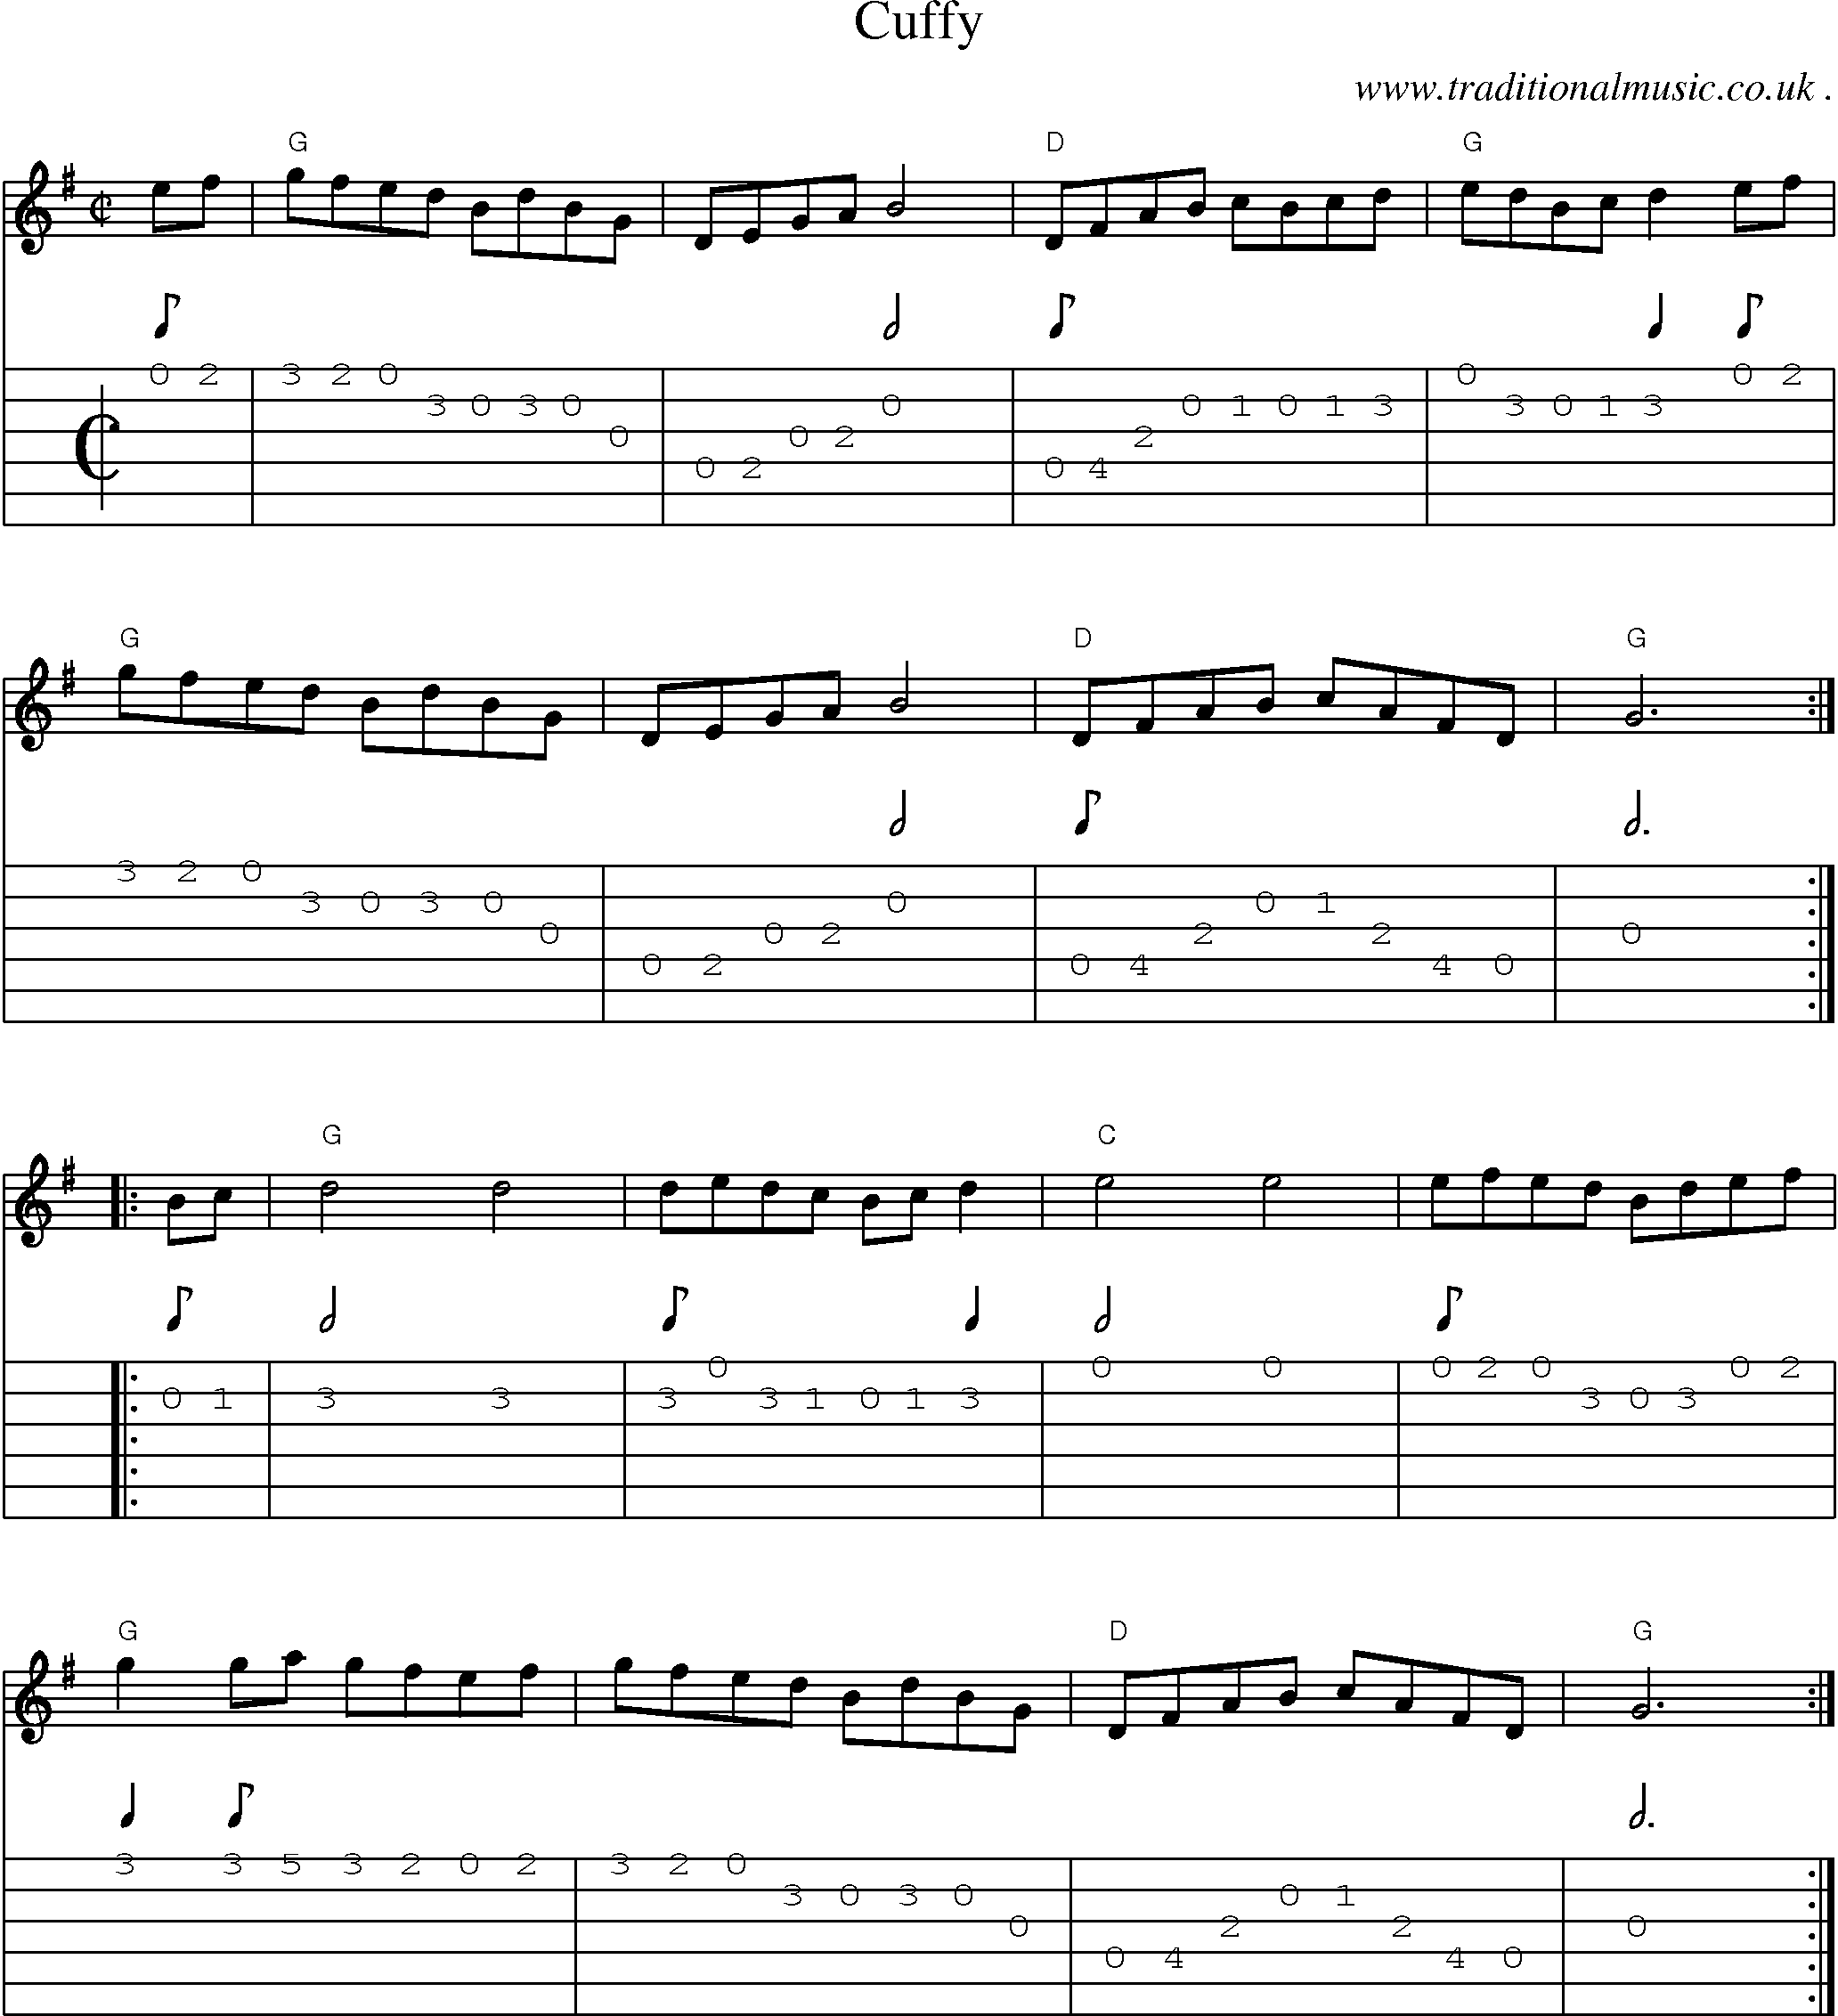 Music Score and Guitar Tabs for Cuffy